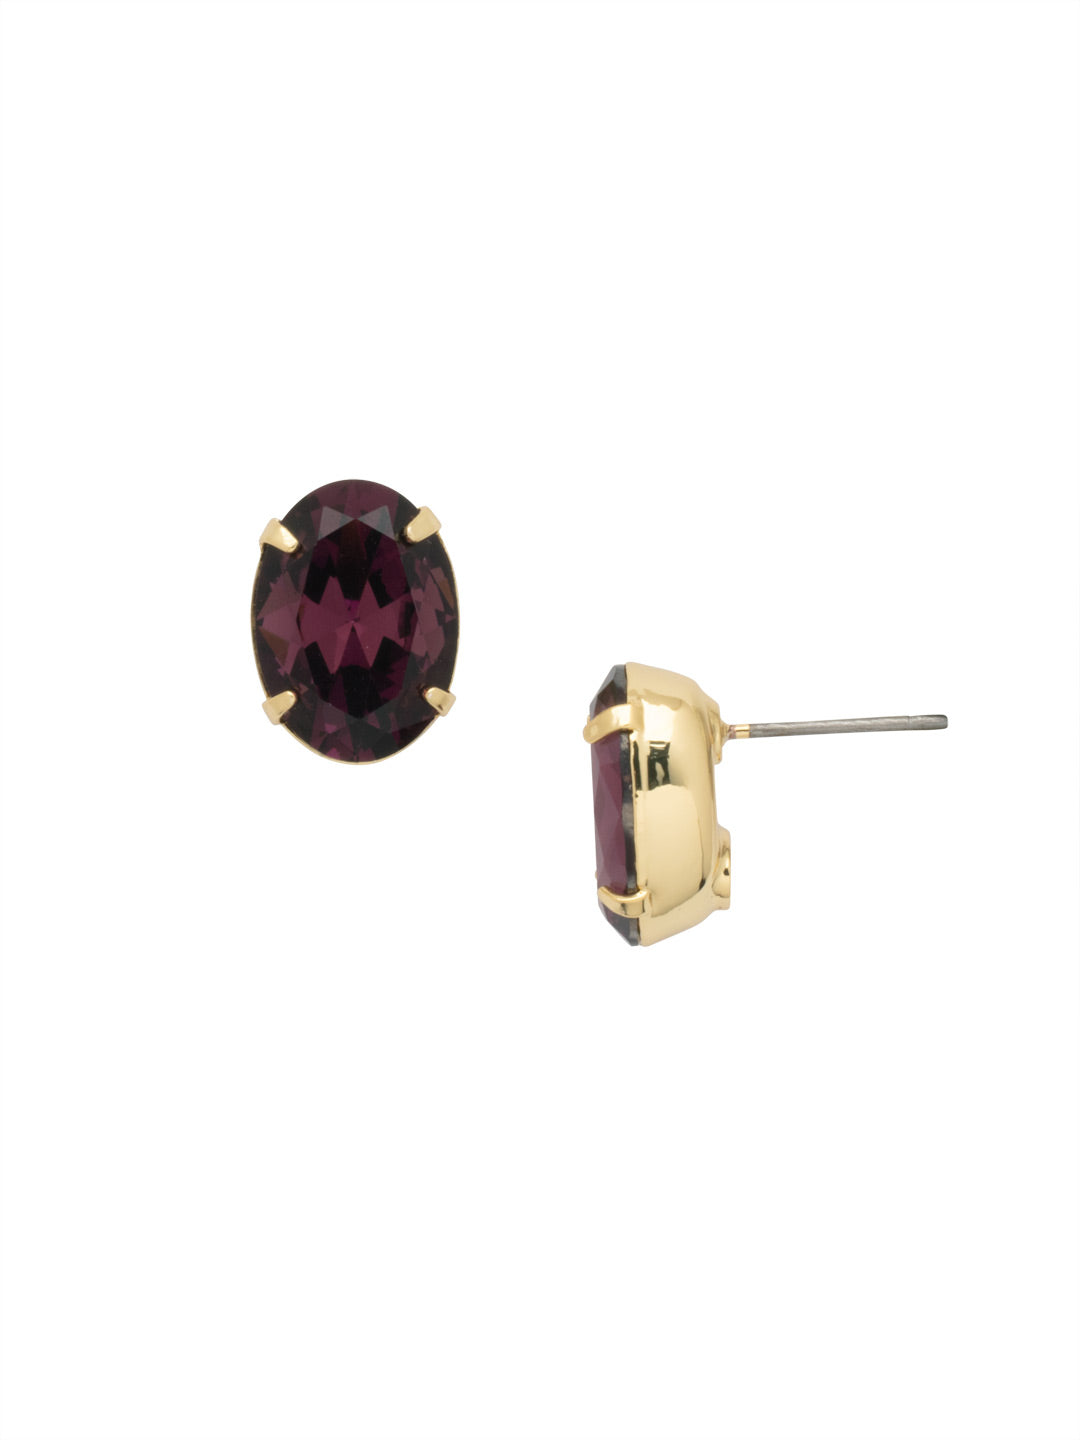 Oval Cut Stud Earrings - EFL14BGMRL - <p>The Oval Cut Stud Earrings feature a single oval cut crystal on a post. From Sorrelli's Merlot collection in our Bright Gold-tone finish.</p>